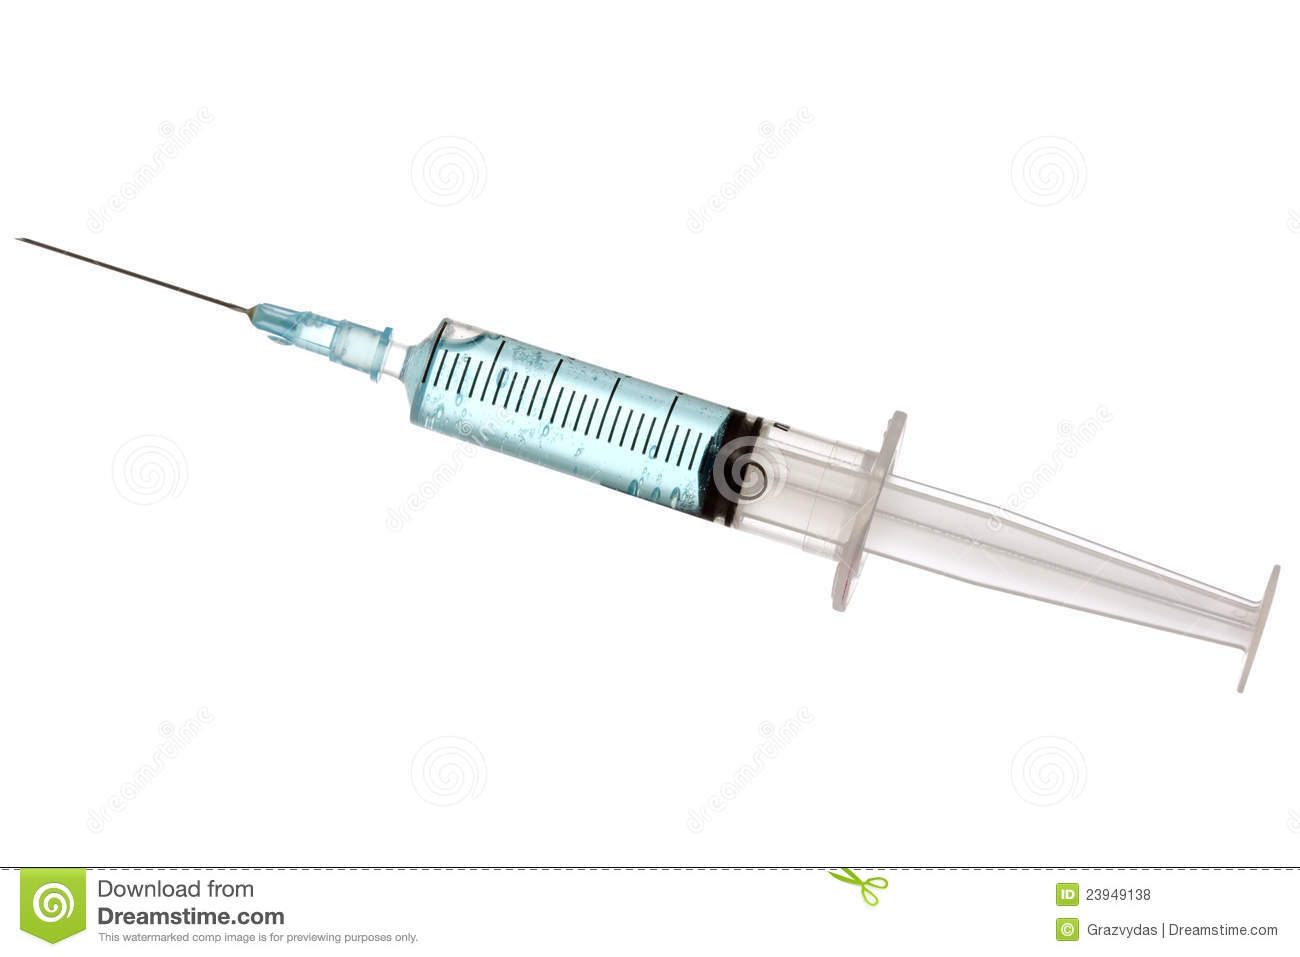 6 Free Stock Photos Of Syringes Images